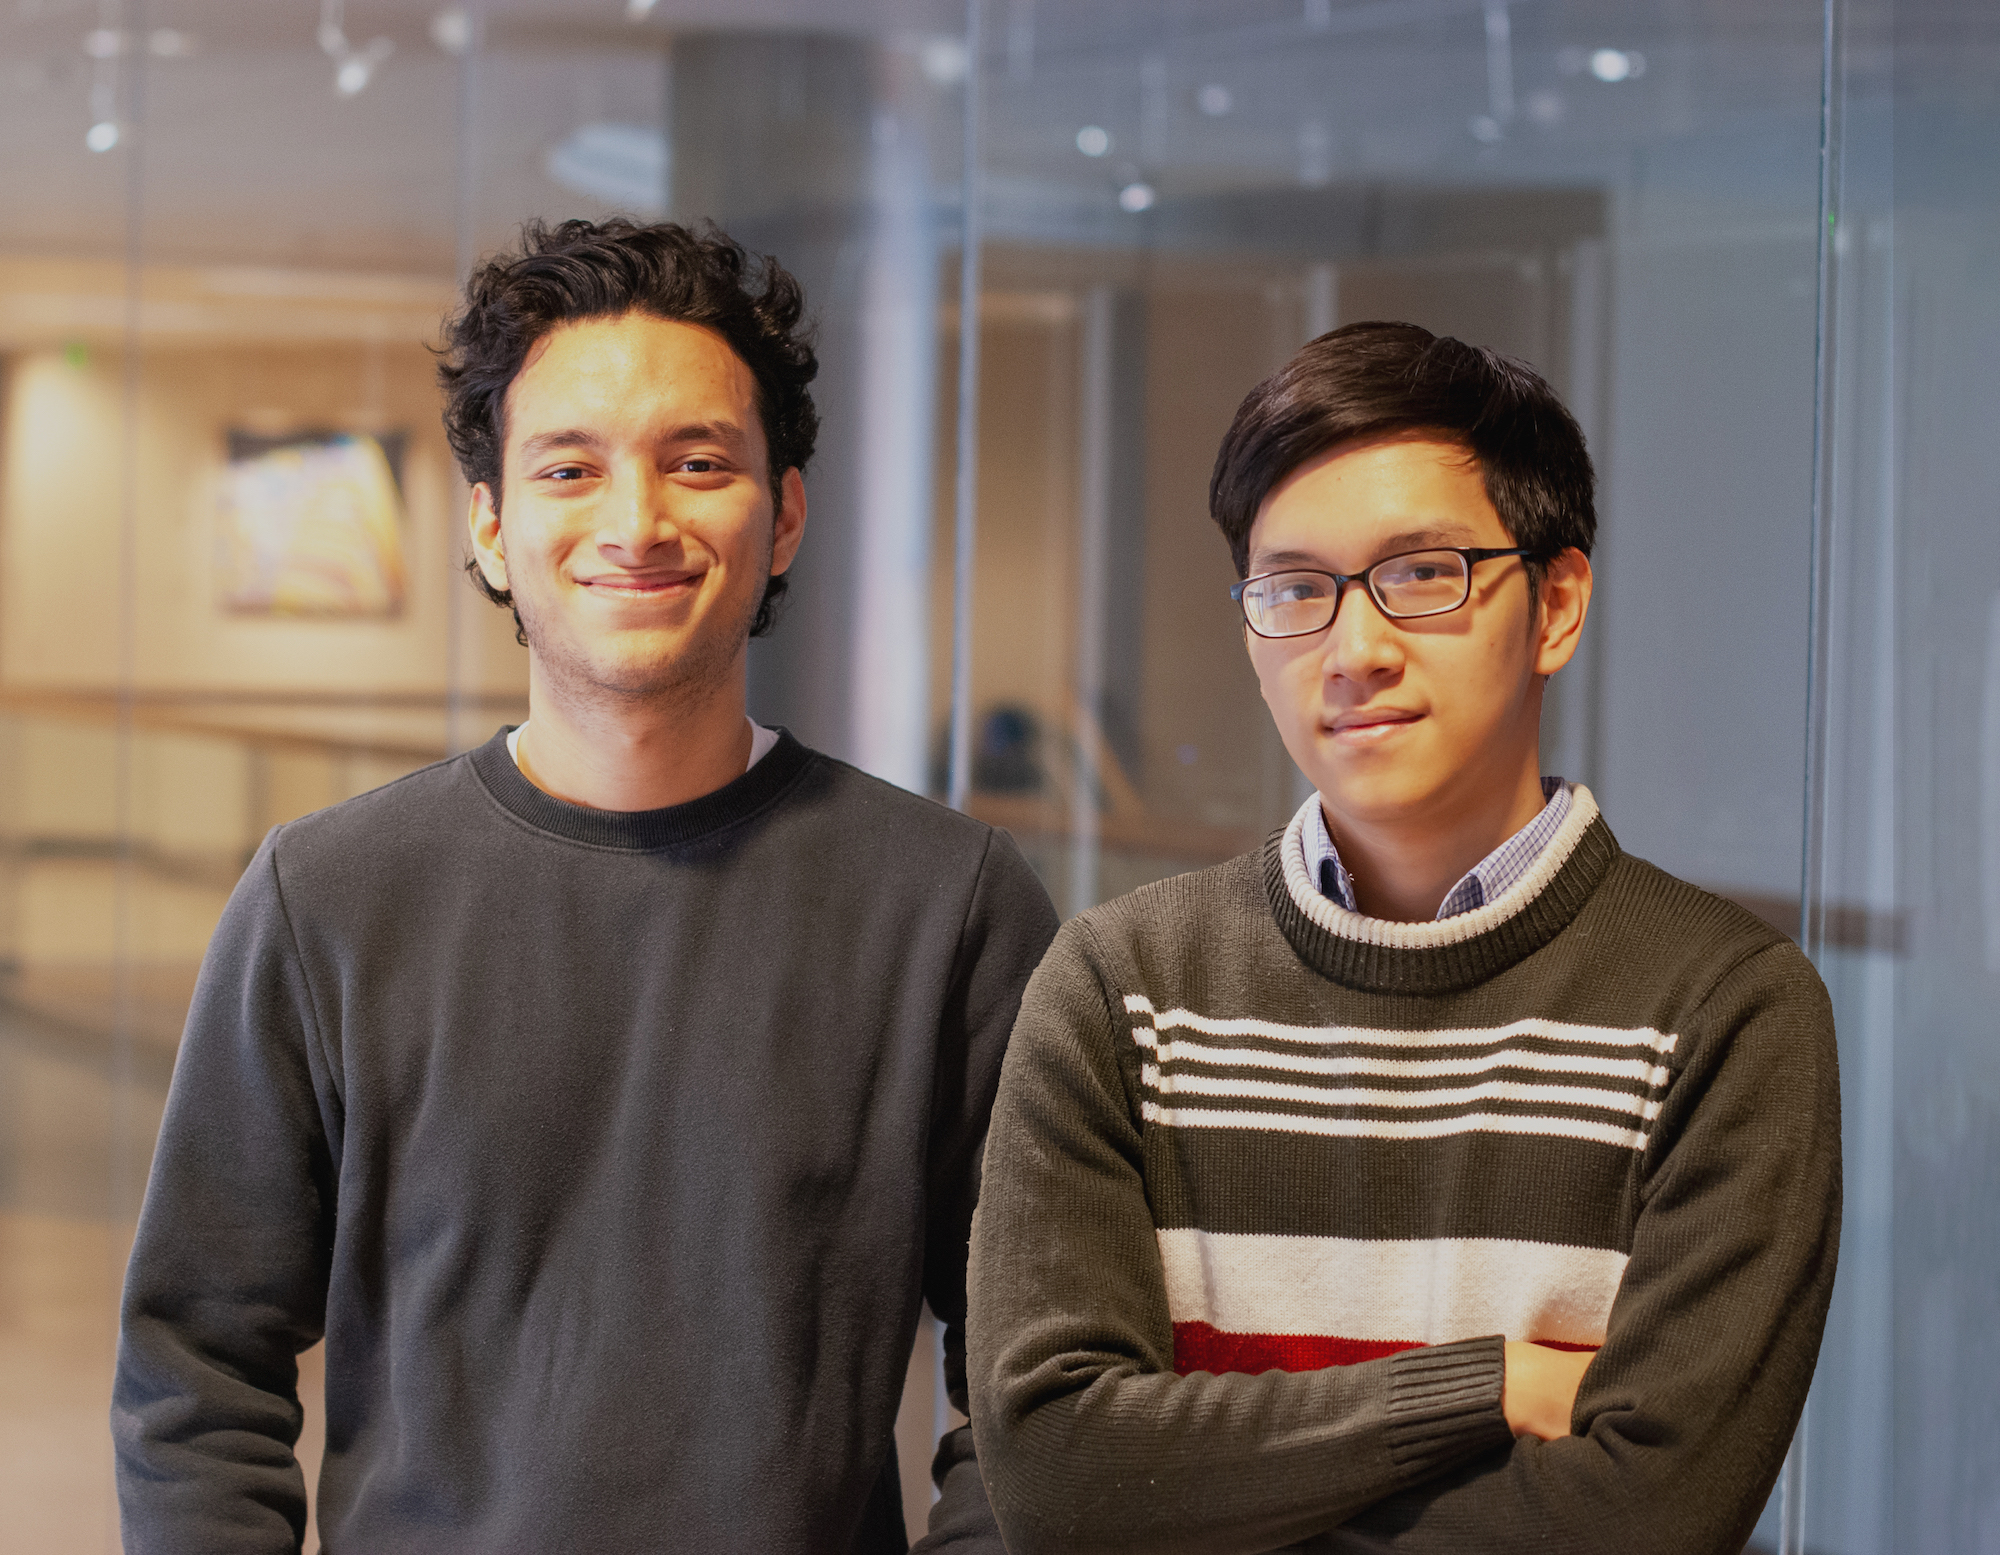 Trung Dang and Shreyas Kharbanda are undergraduate researchers who received an honorable recognition from the CRA for the 2023 Outstanding Undergraduate Researcher competition.